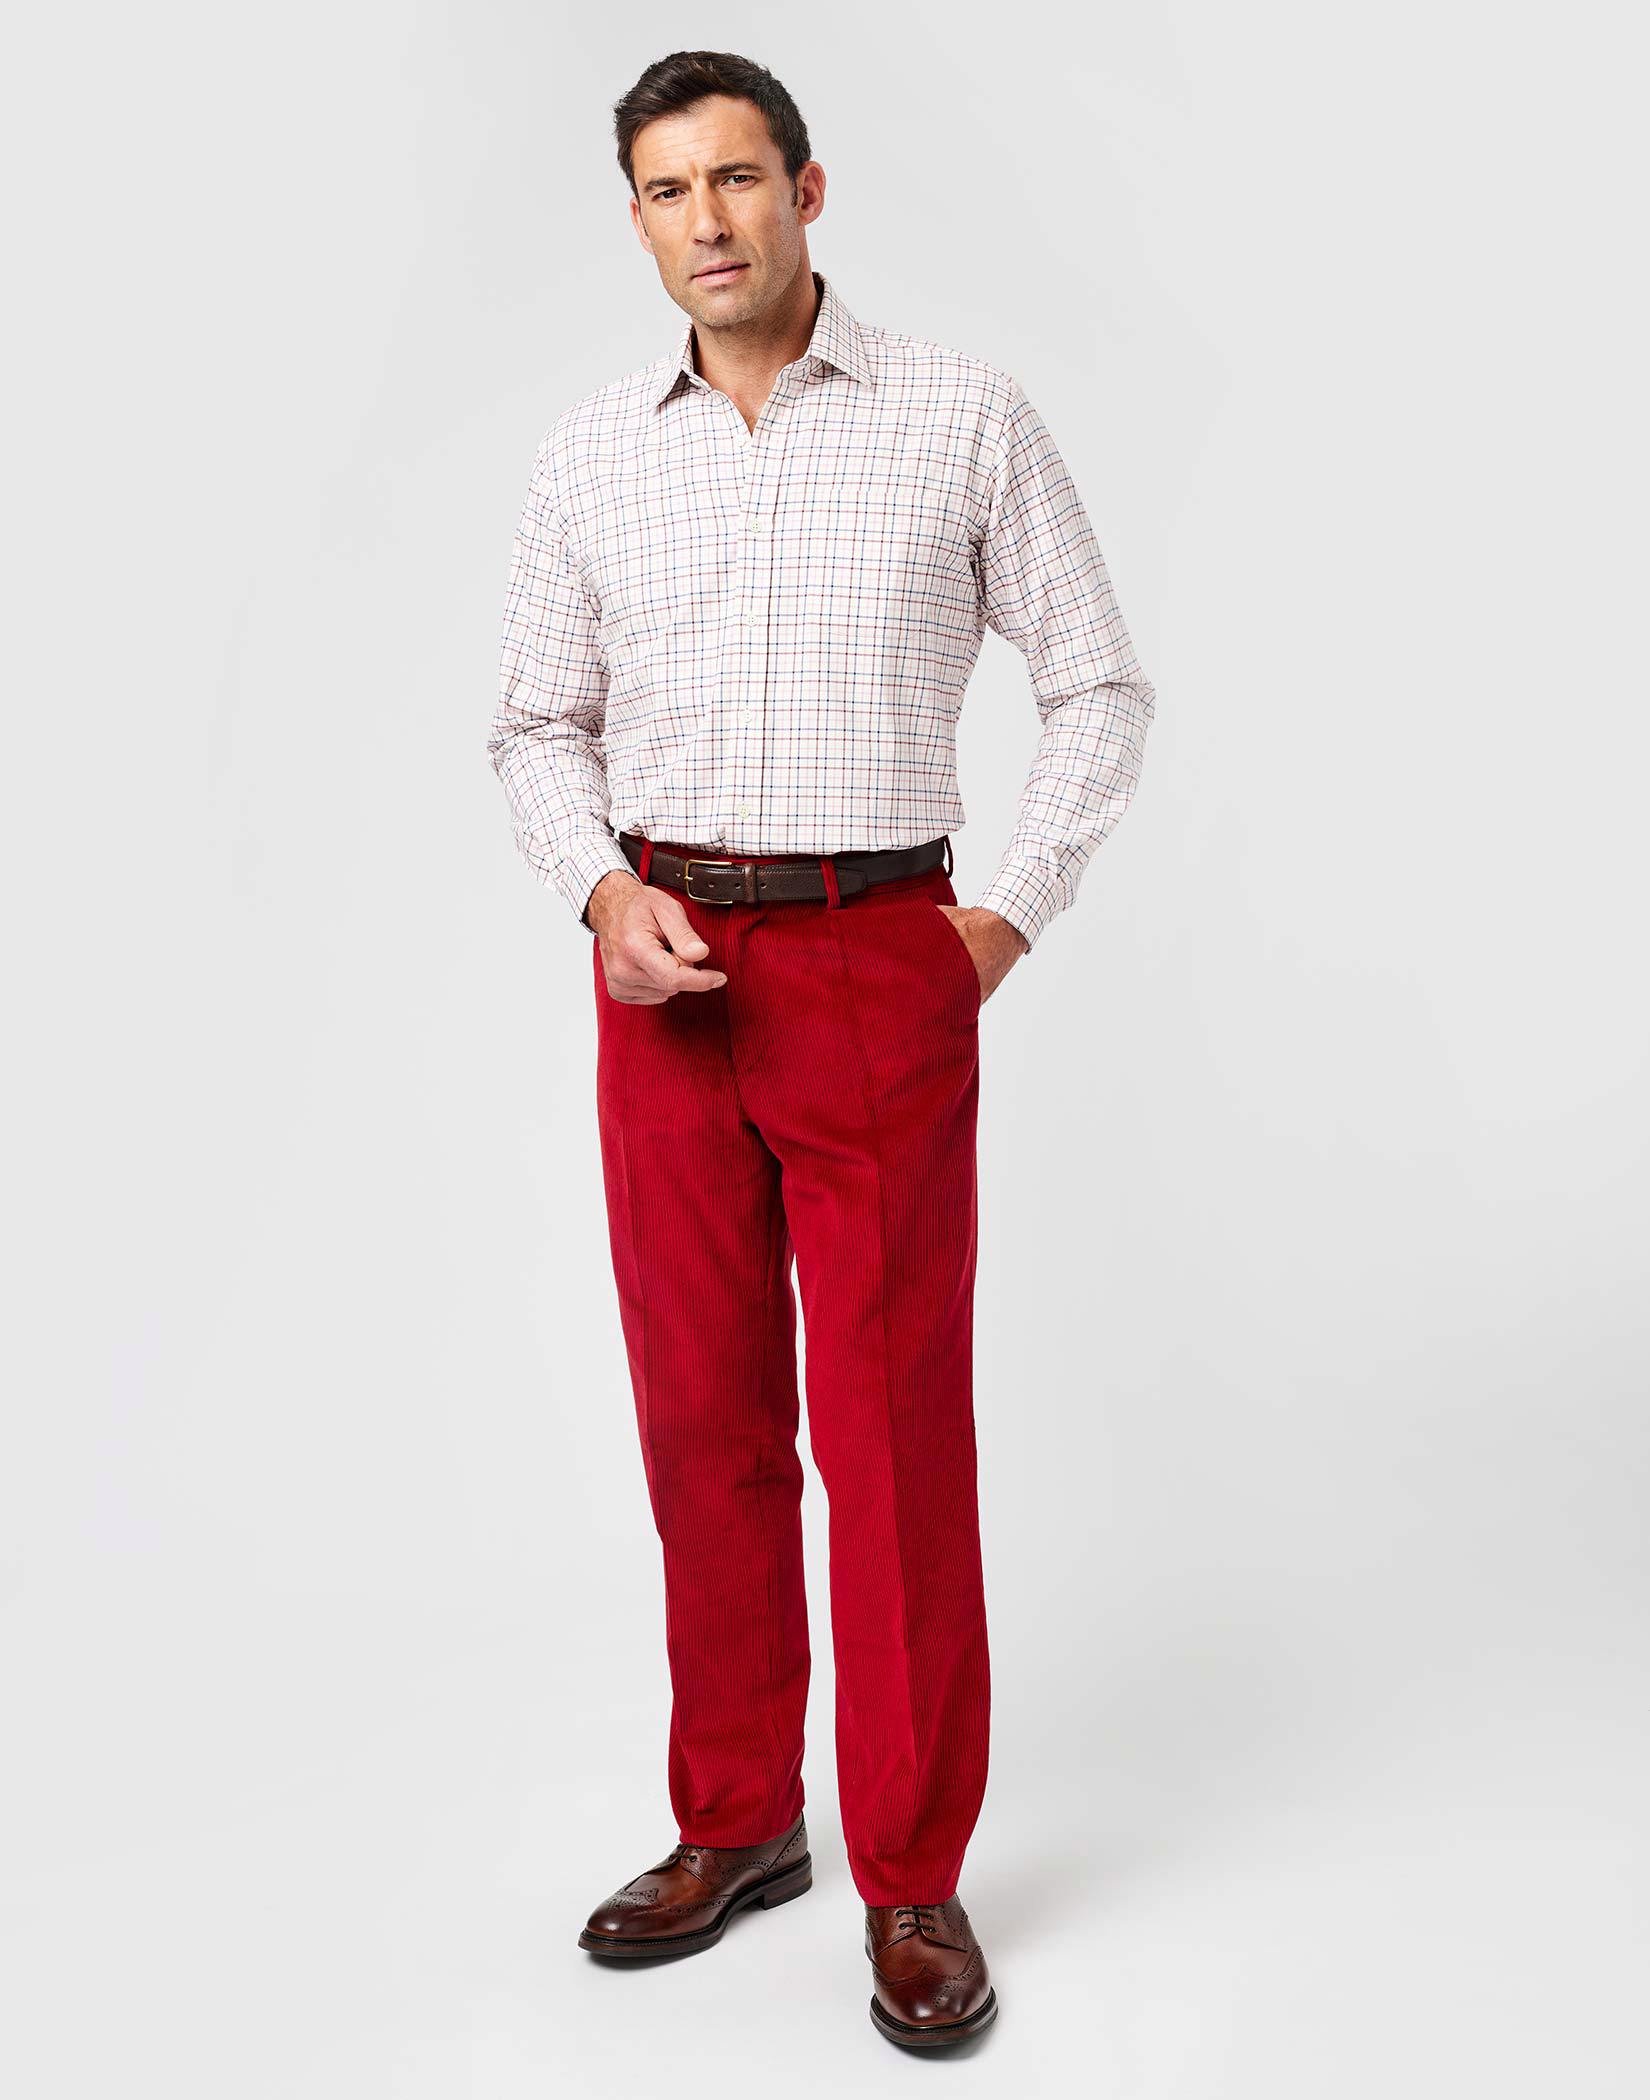 Aggregate 89+ red trousers men - in.cdgdbentre